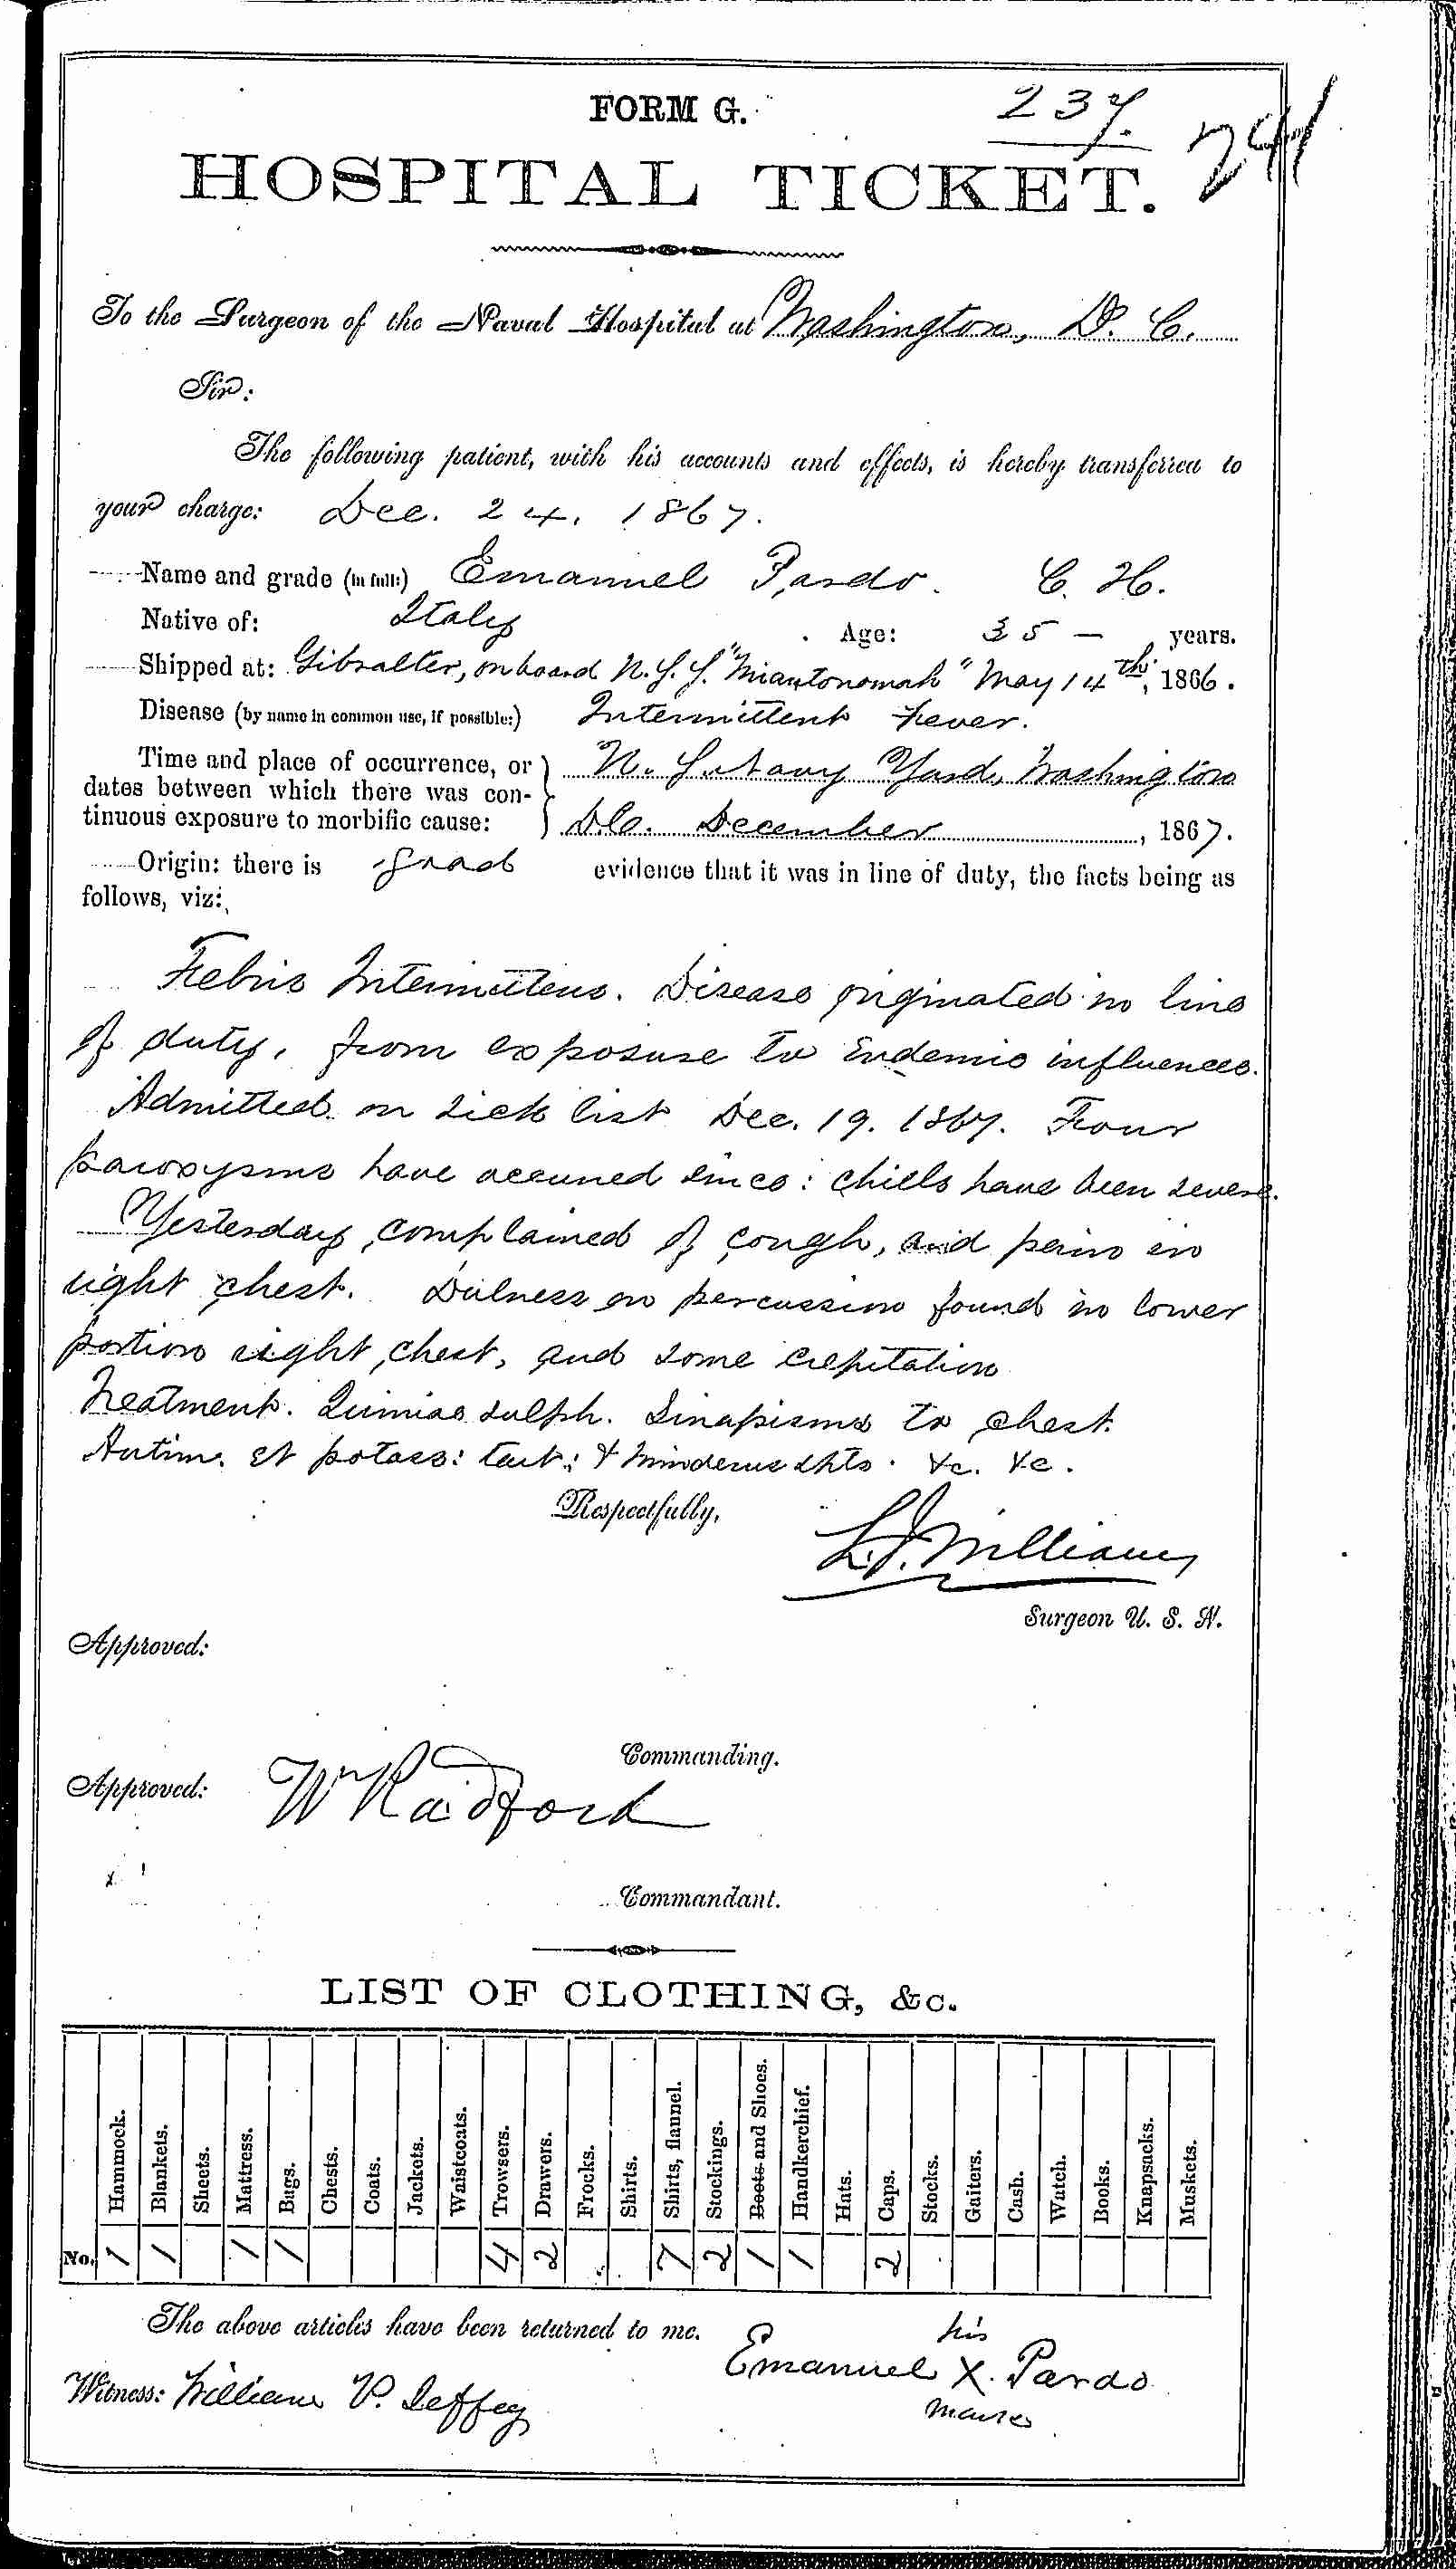 Entry for Emanuel Pardo (page 1 of 2) in the log Hospital Tickets and Case Papers - Naval Hospital - Washington, D.C. - 1866-68